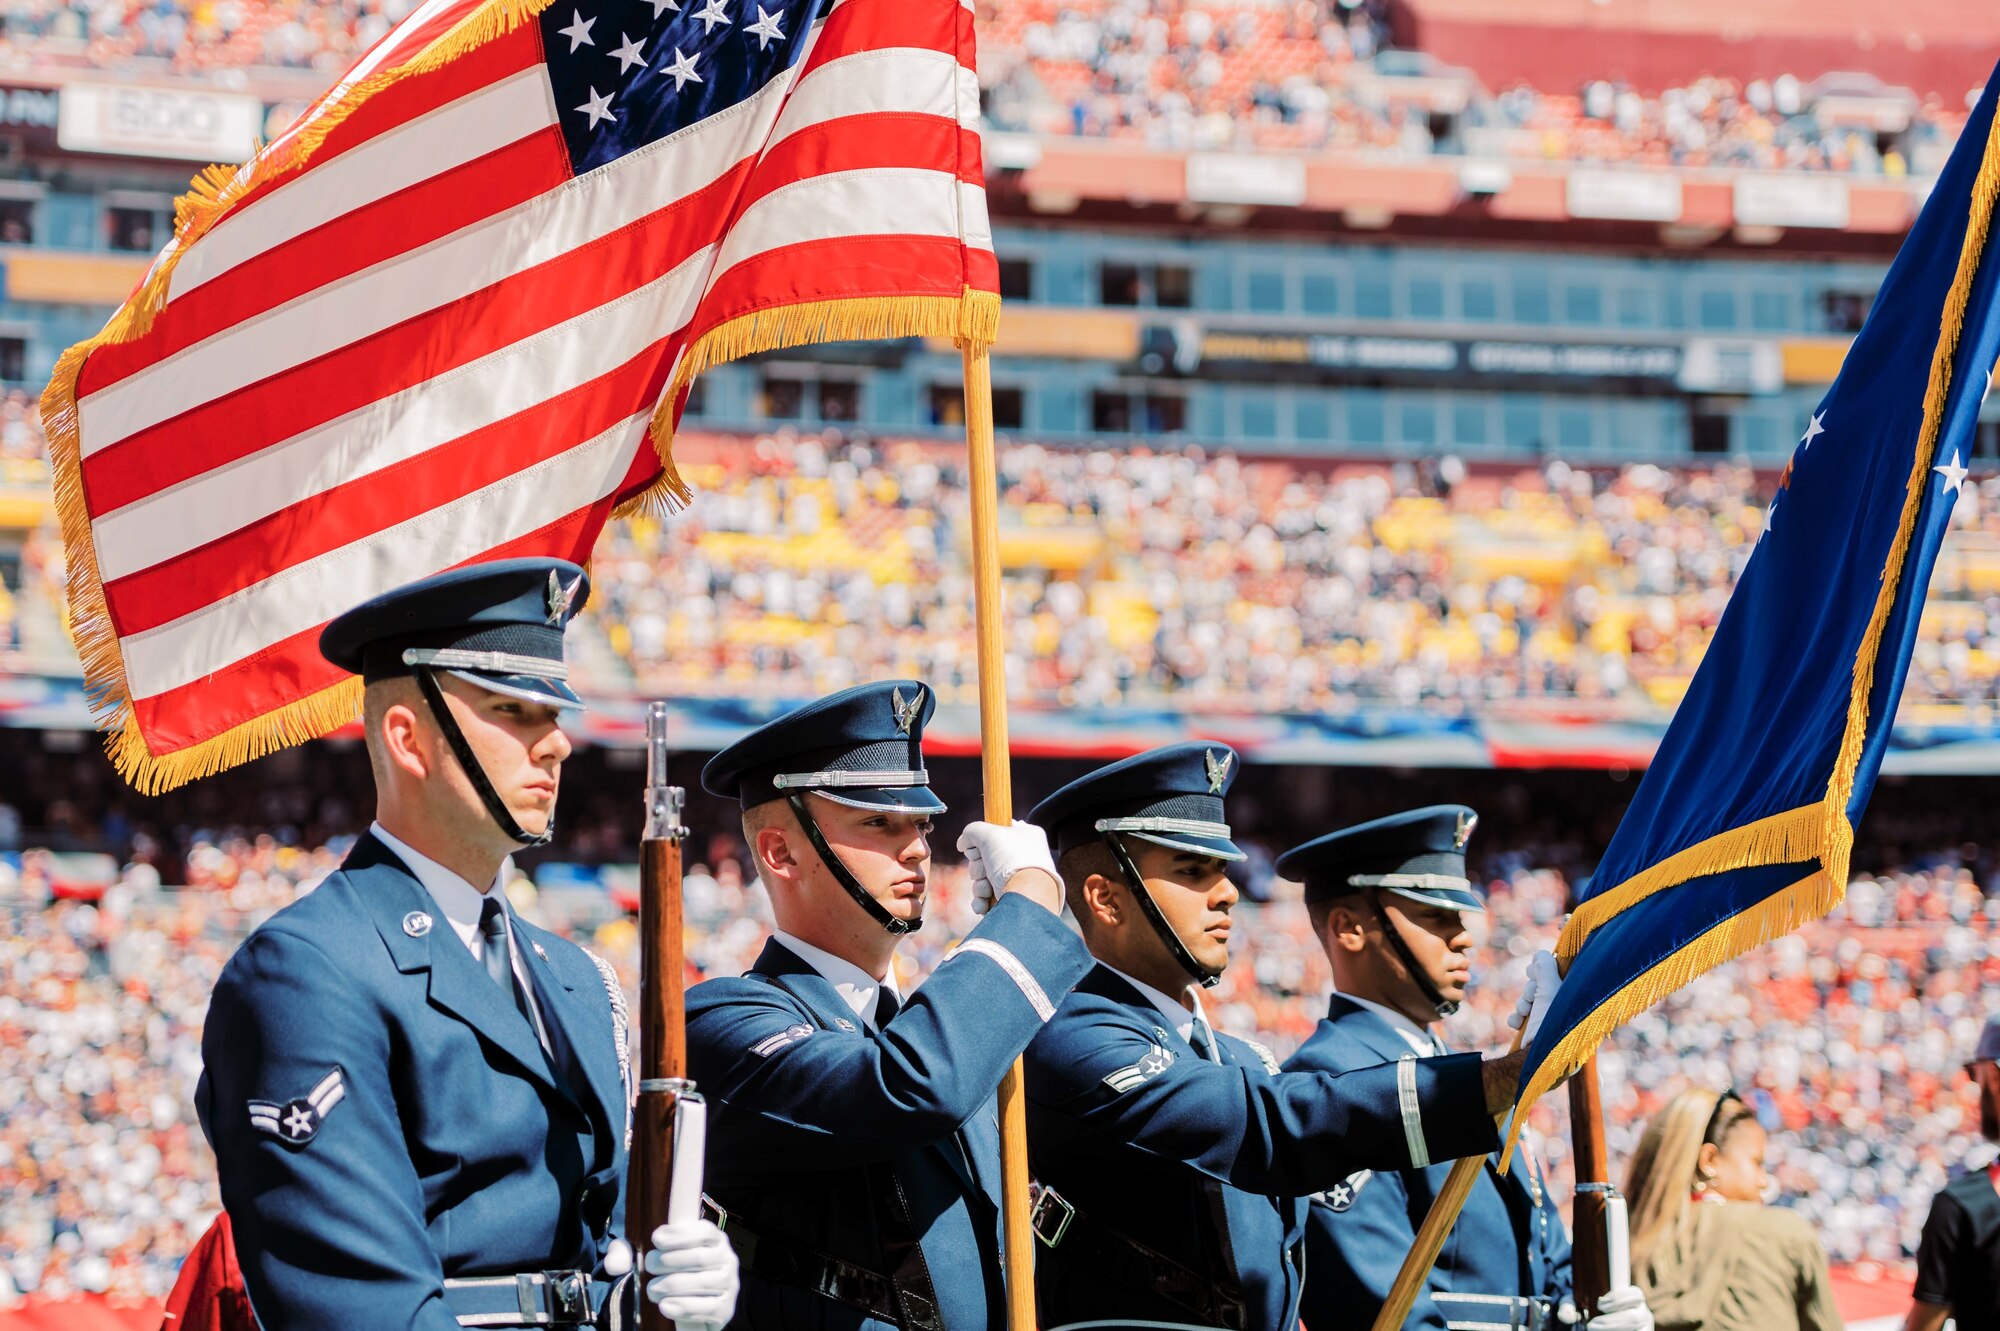 The United States Air Force Honor Guard presents the colors at a football game